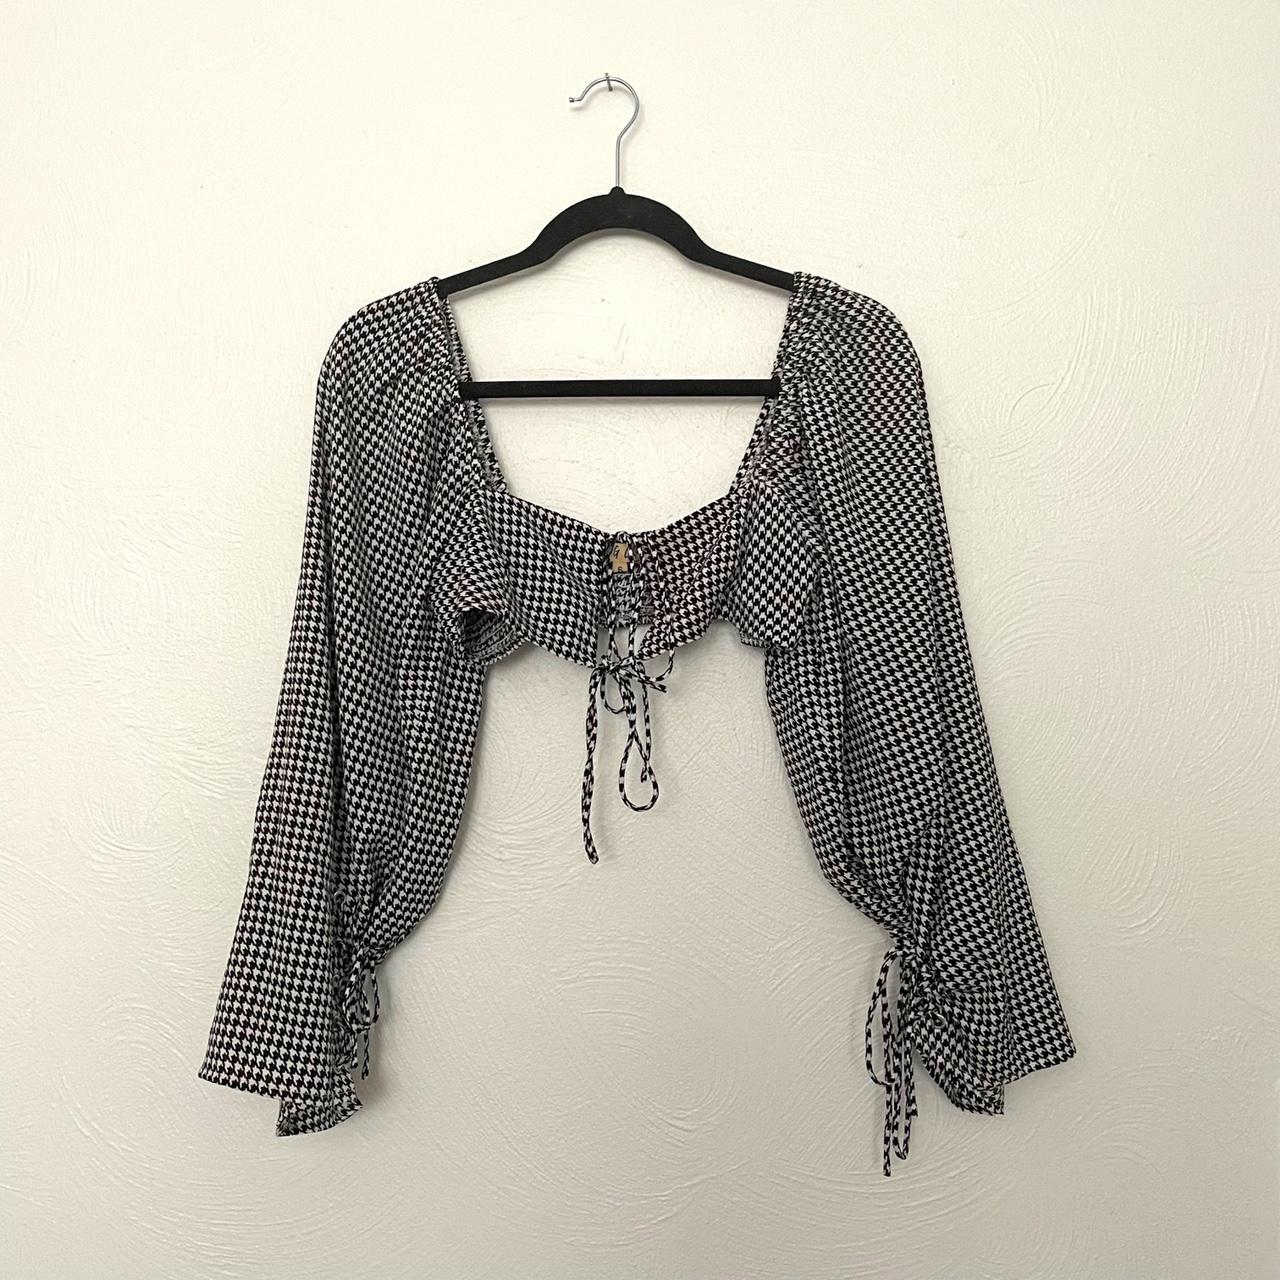 Product Image 2 - Houndstooth crop top!

from Verge Girl

adjustable